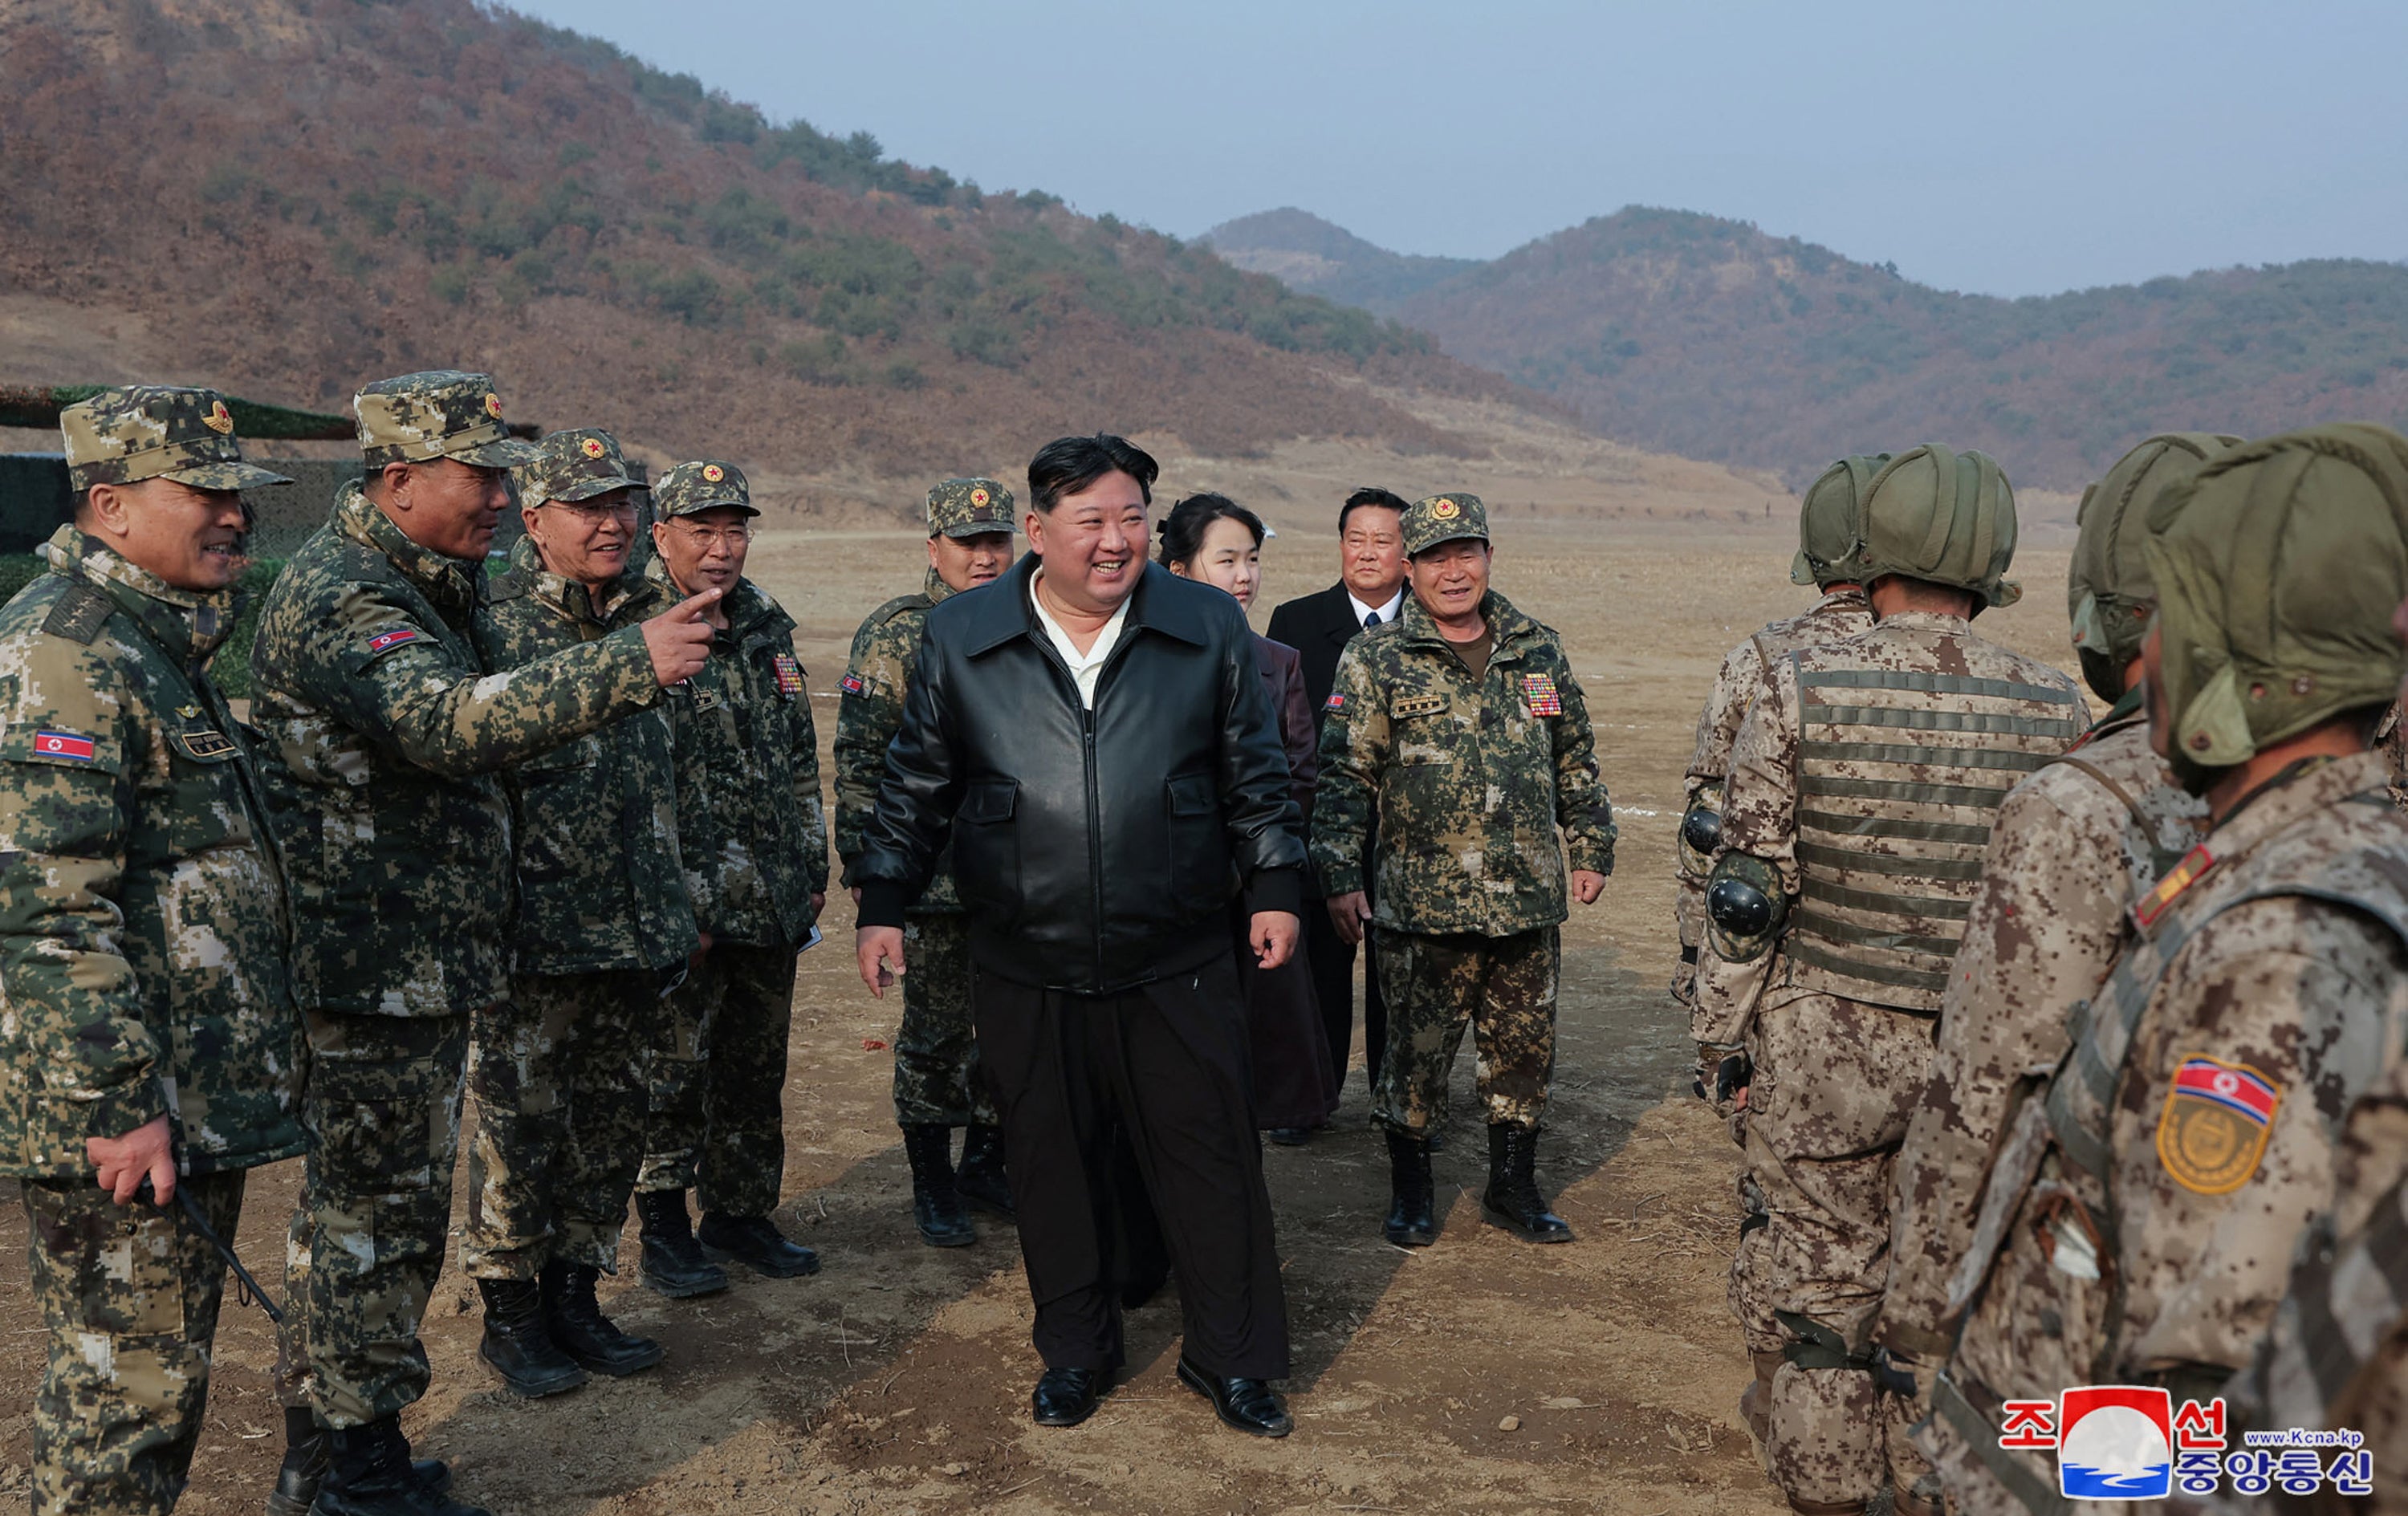 North Korea’s Kim Jong-un overseeing militray drills along with his daugter